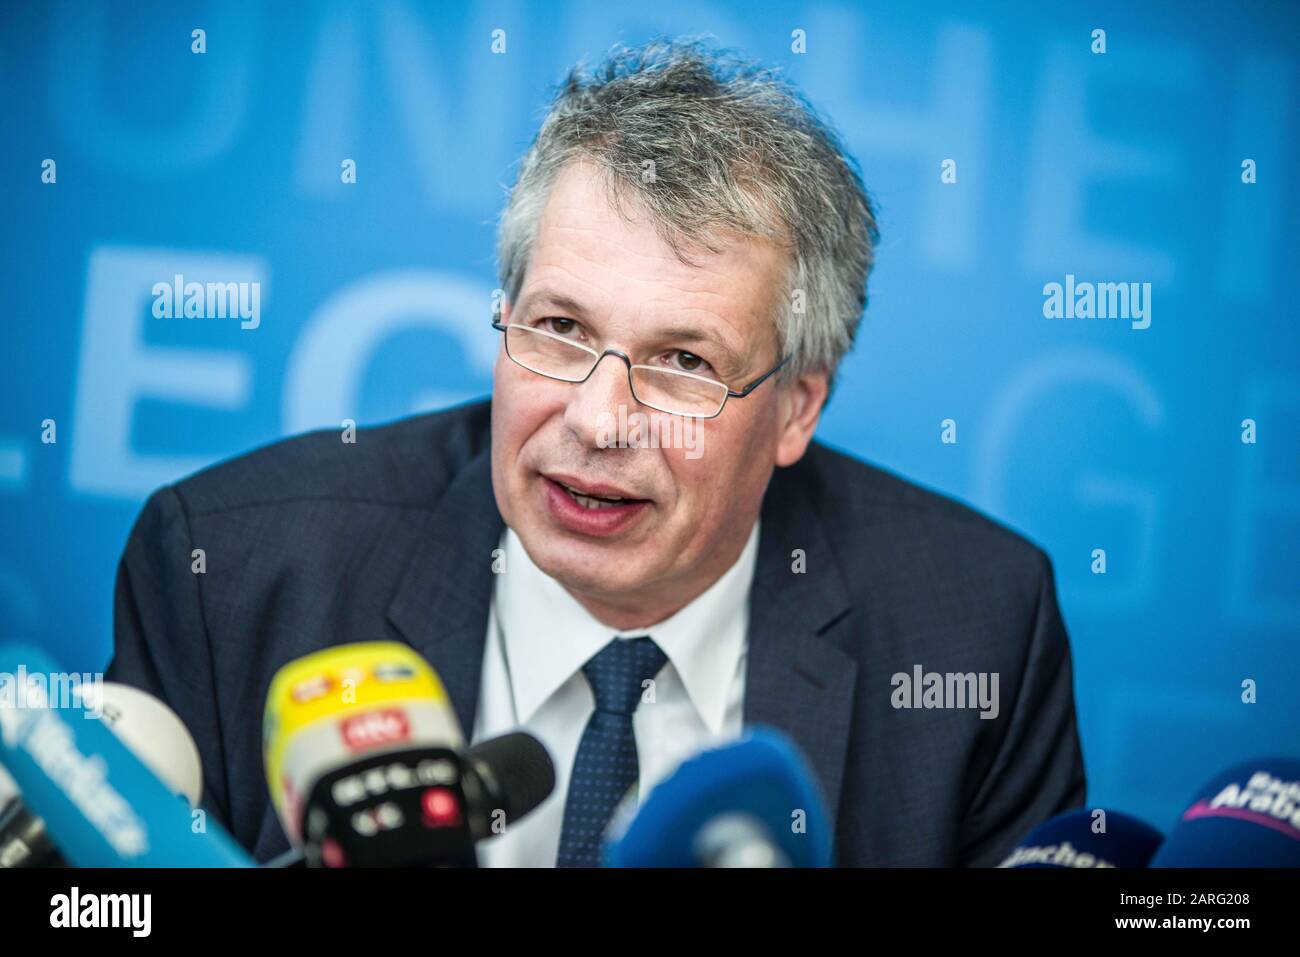 Munich, Bavaria, Germany. 28th Jan, 2020. DR. ANDREAS ZAPF, President of the Bayerisches Landesamt fuer Gesundheit und Lebensmittelsicherheit (Bavarian Office for Health and Food Safety, LGL). In connection with the first confirmed case of Corona Virus in Germany, the Bavarian Health Ministry (Bayerisches Staatsministerium fuer Gesundheit und Pflege) held a press conference to discuss the findings. The virus was found in the wealthy Lake Starnberg area, just outside of western Munich, which is also connected to the citiy via its S-Bahn network. The affected is a 33 year old from Landsberg, Stock Photo